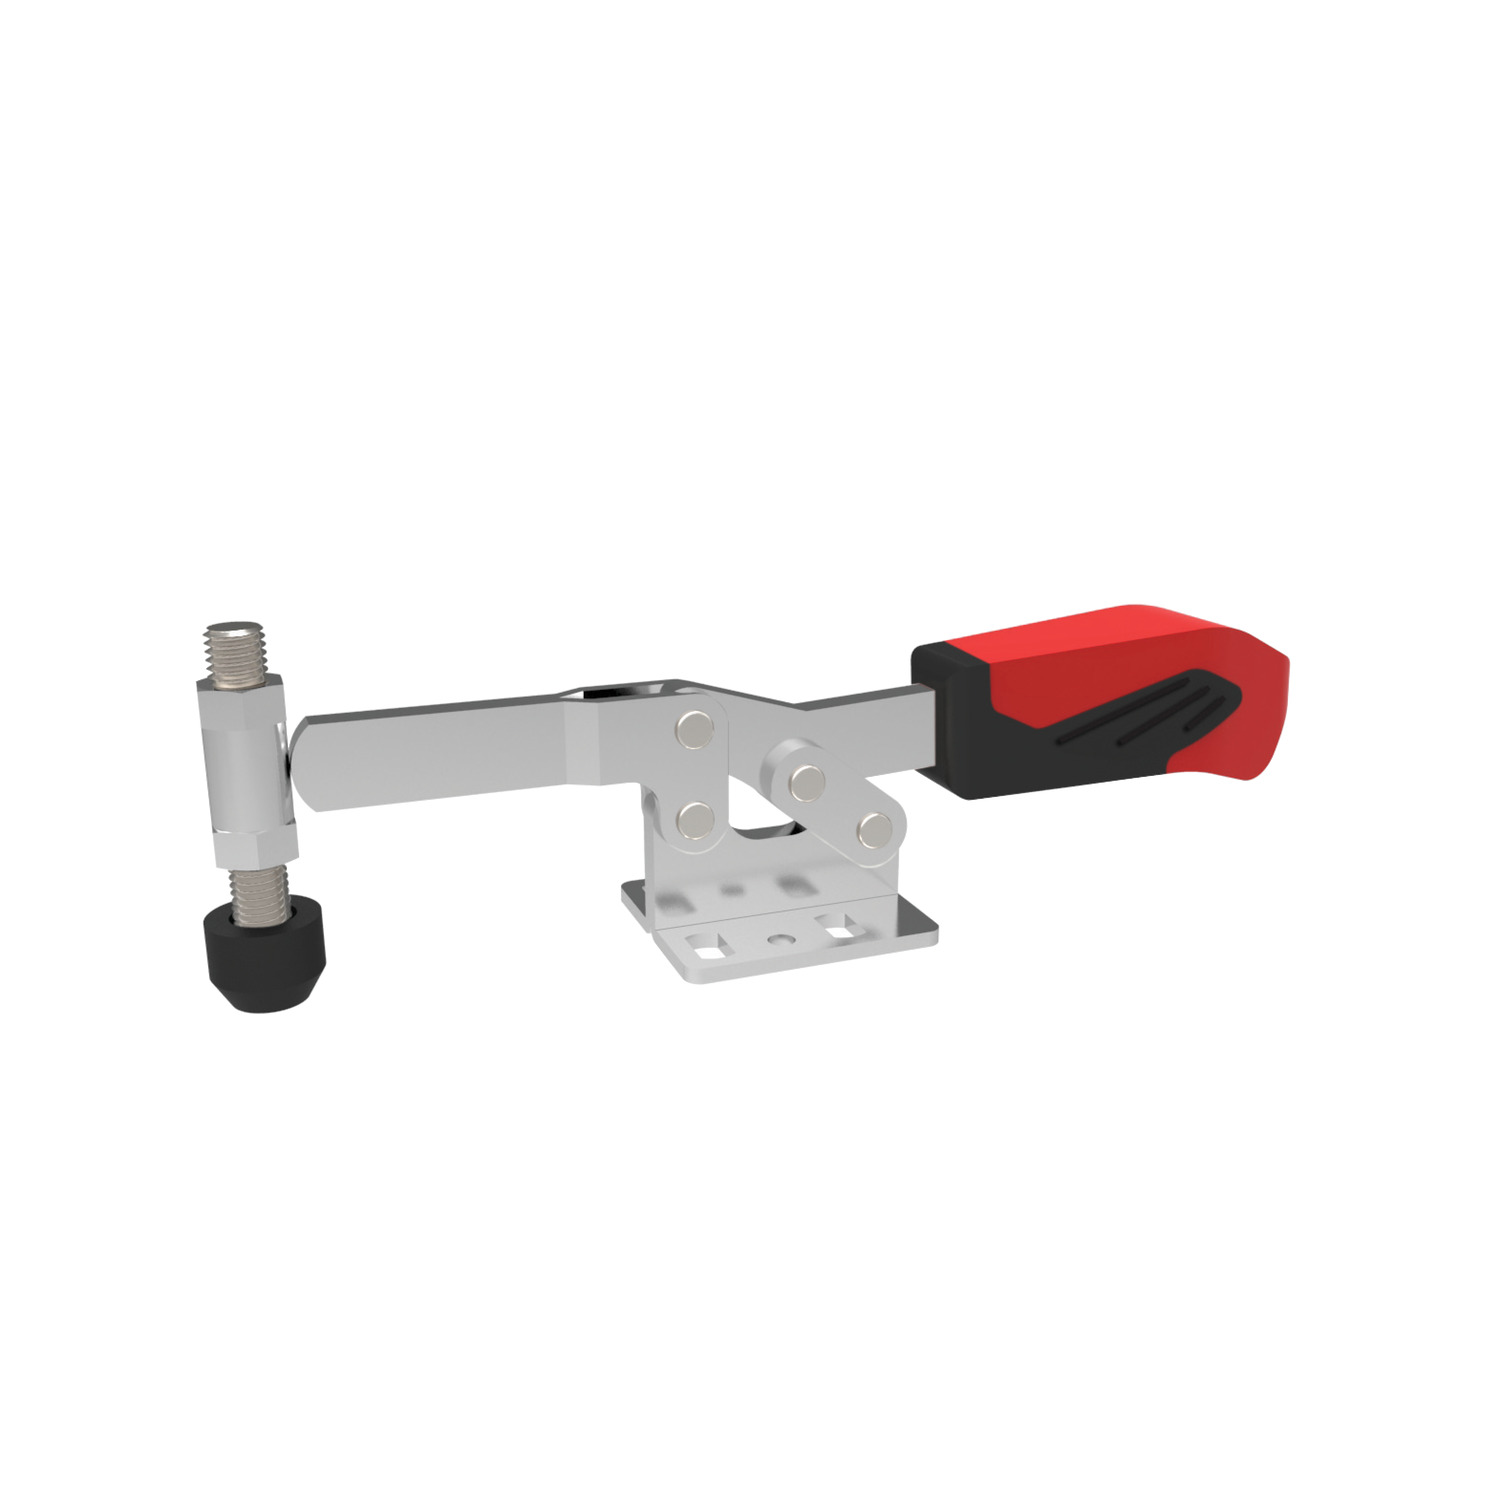 41030 Horizontal Acting Toggle Clamps